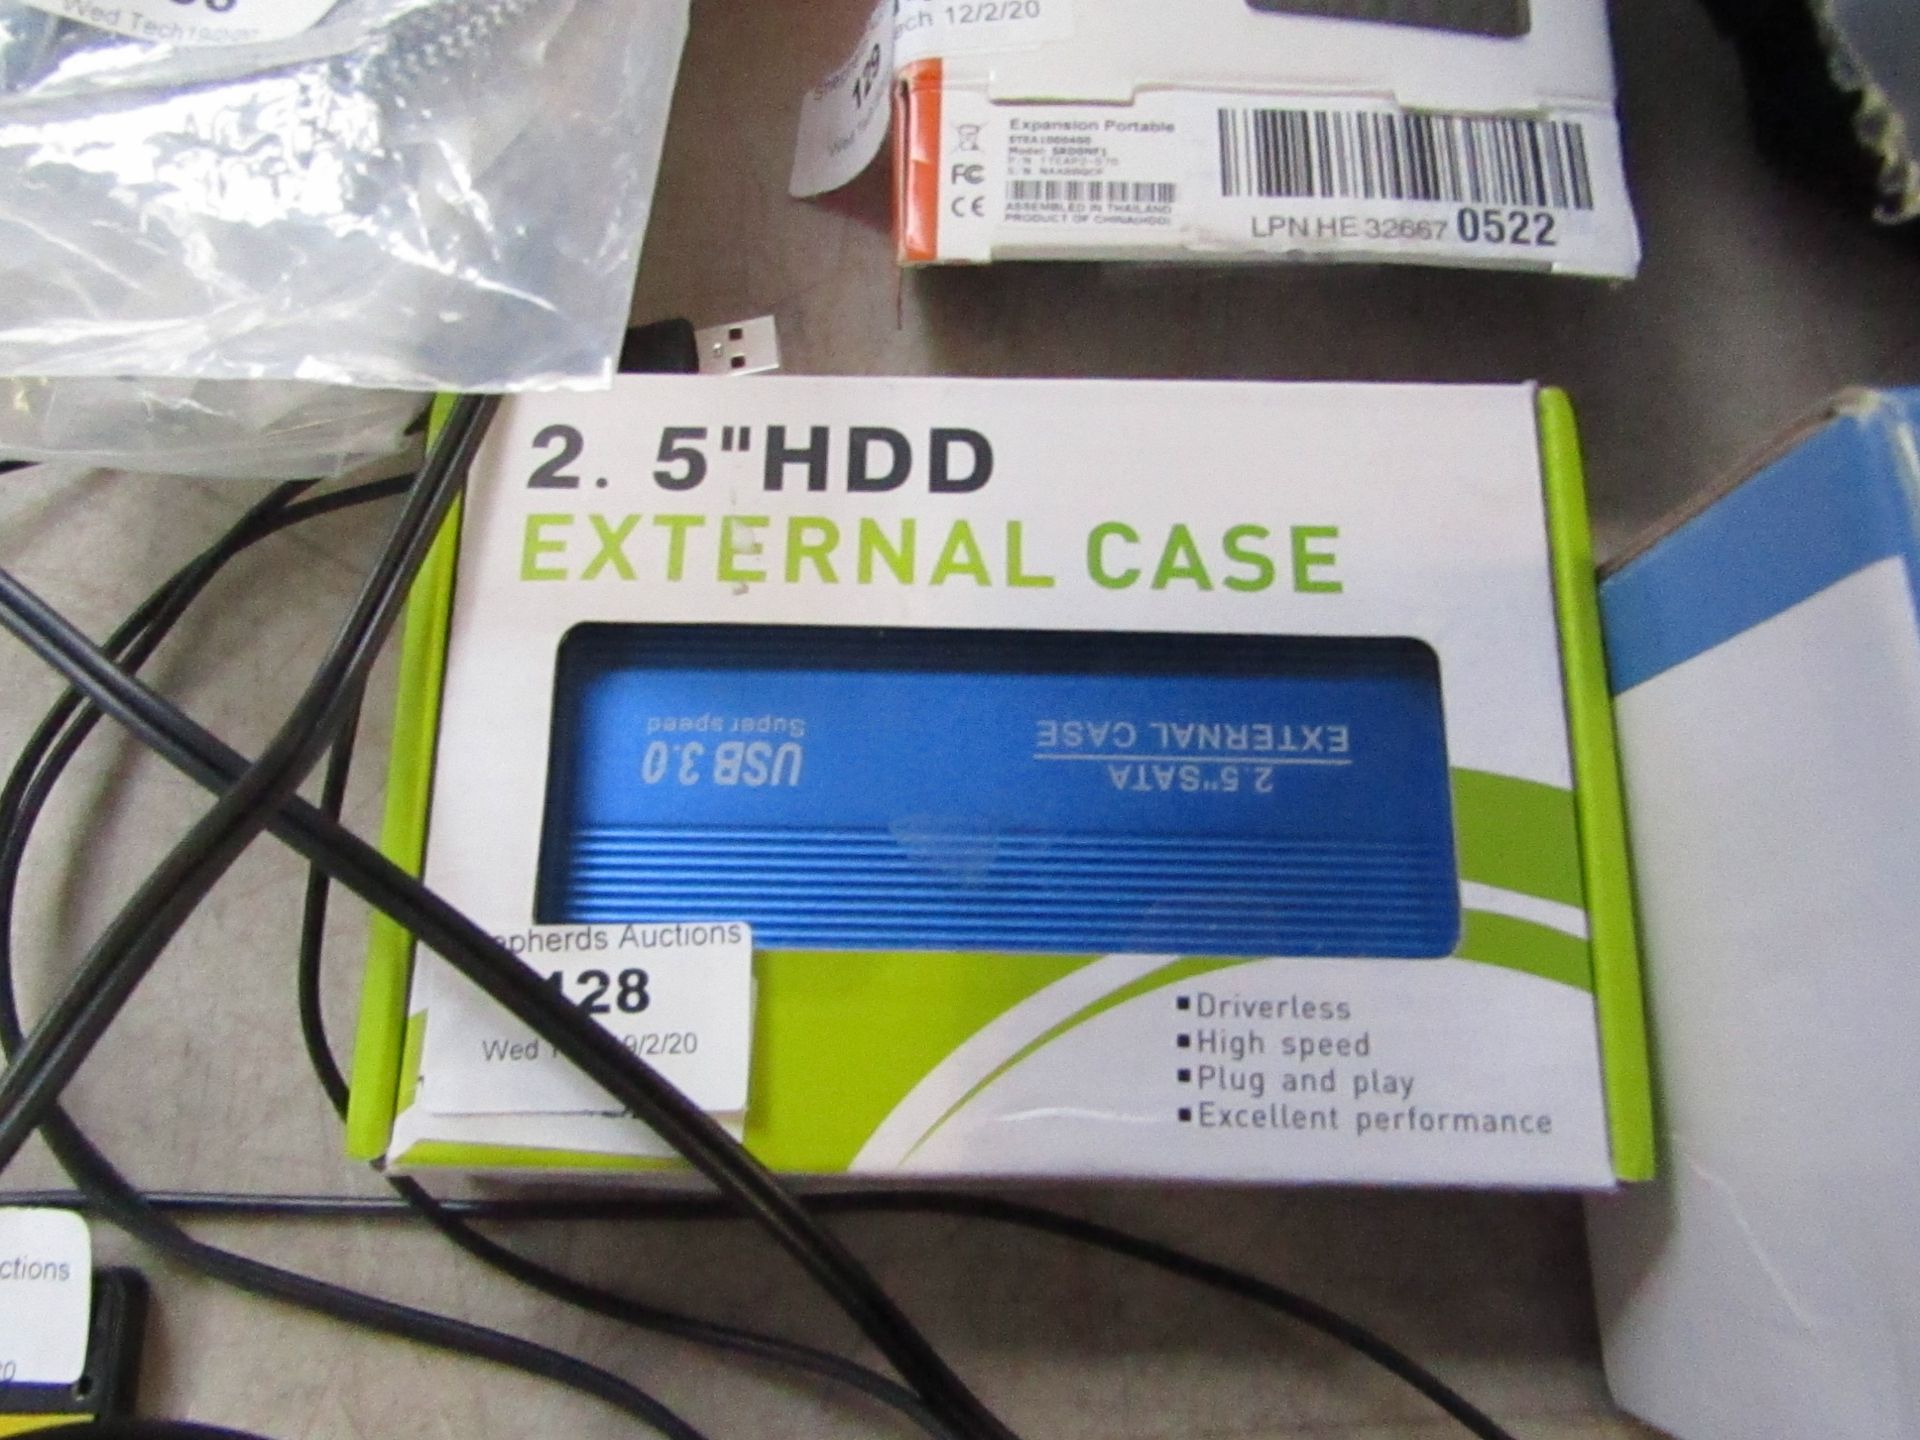 2.5" HDD external case, unchecked and boxed.